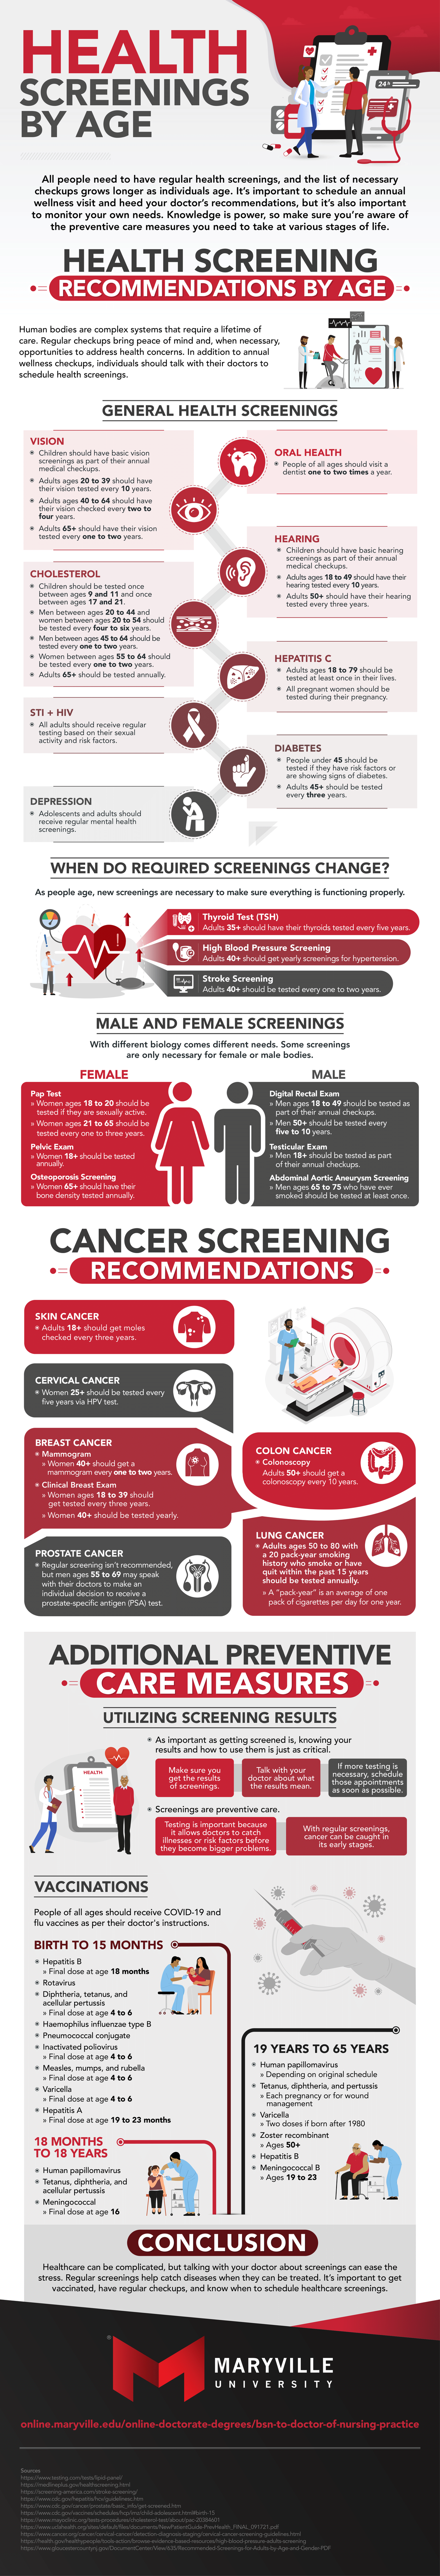 Health screenings by age infographic